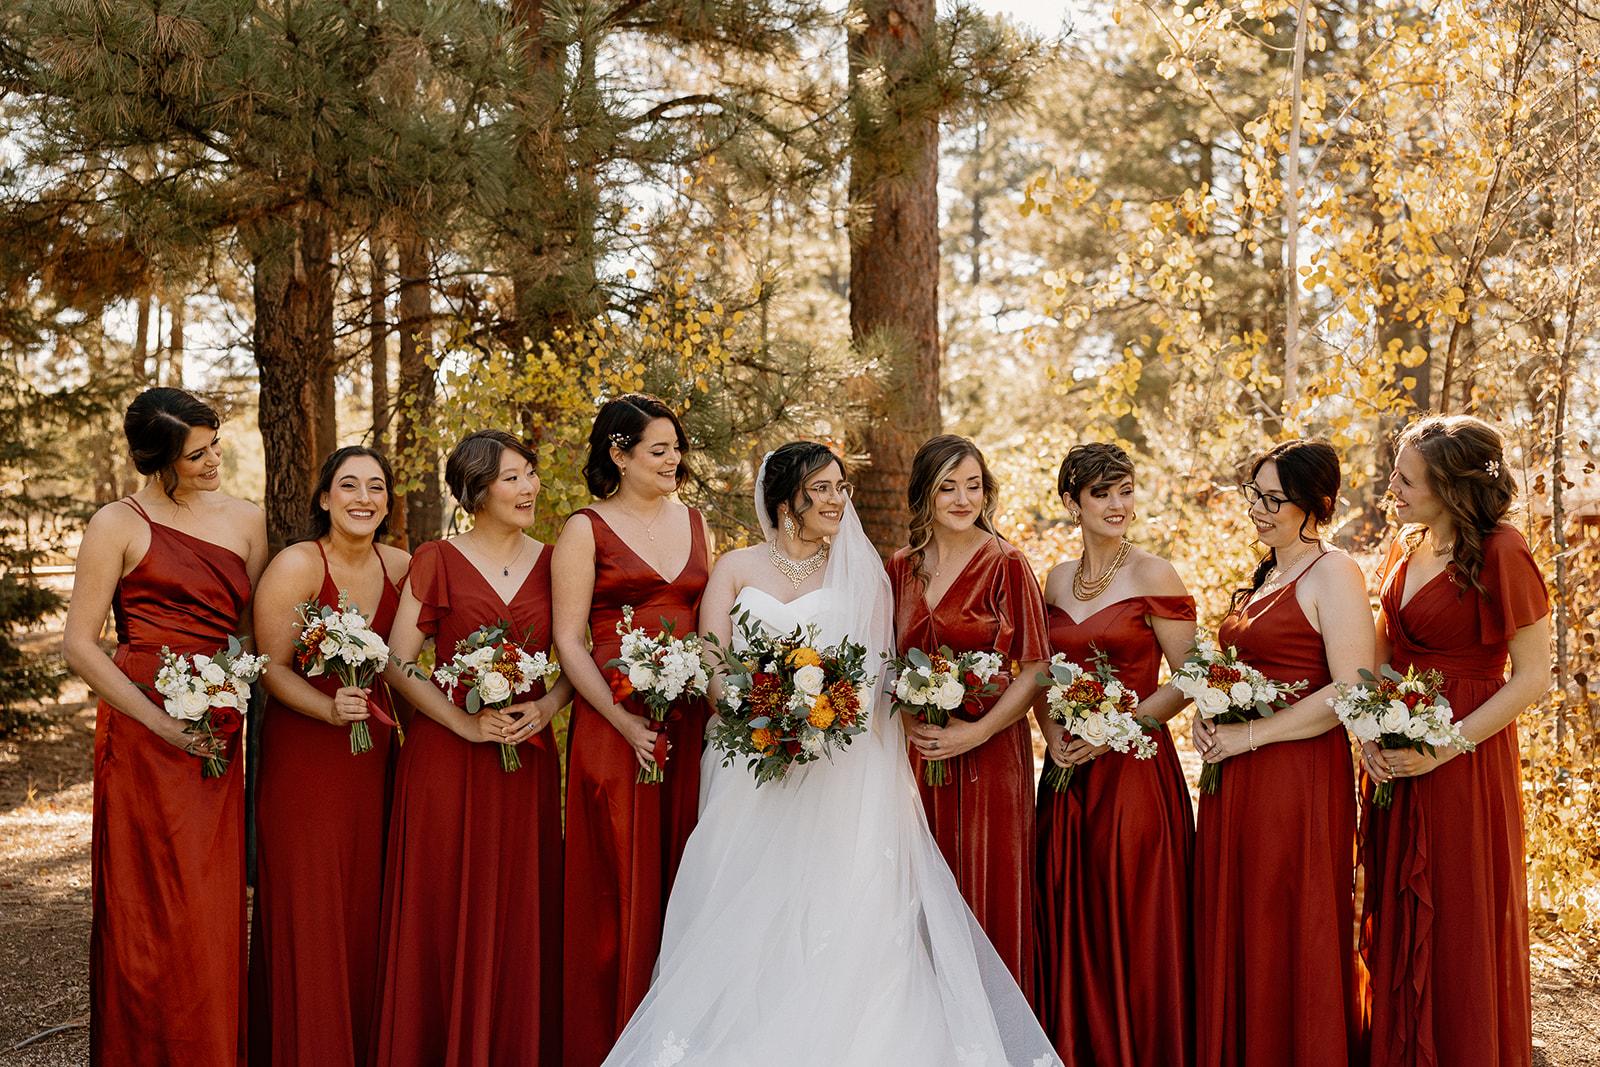 Bride poses with her bridesmaids as they prepare for the stunning Flagstaff wedding day